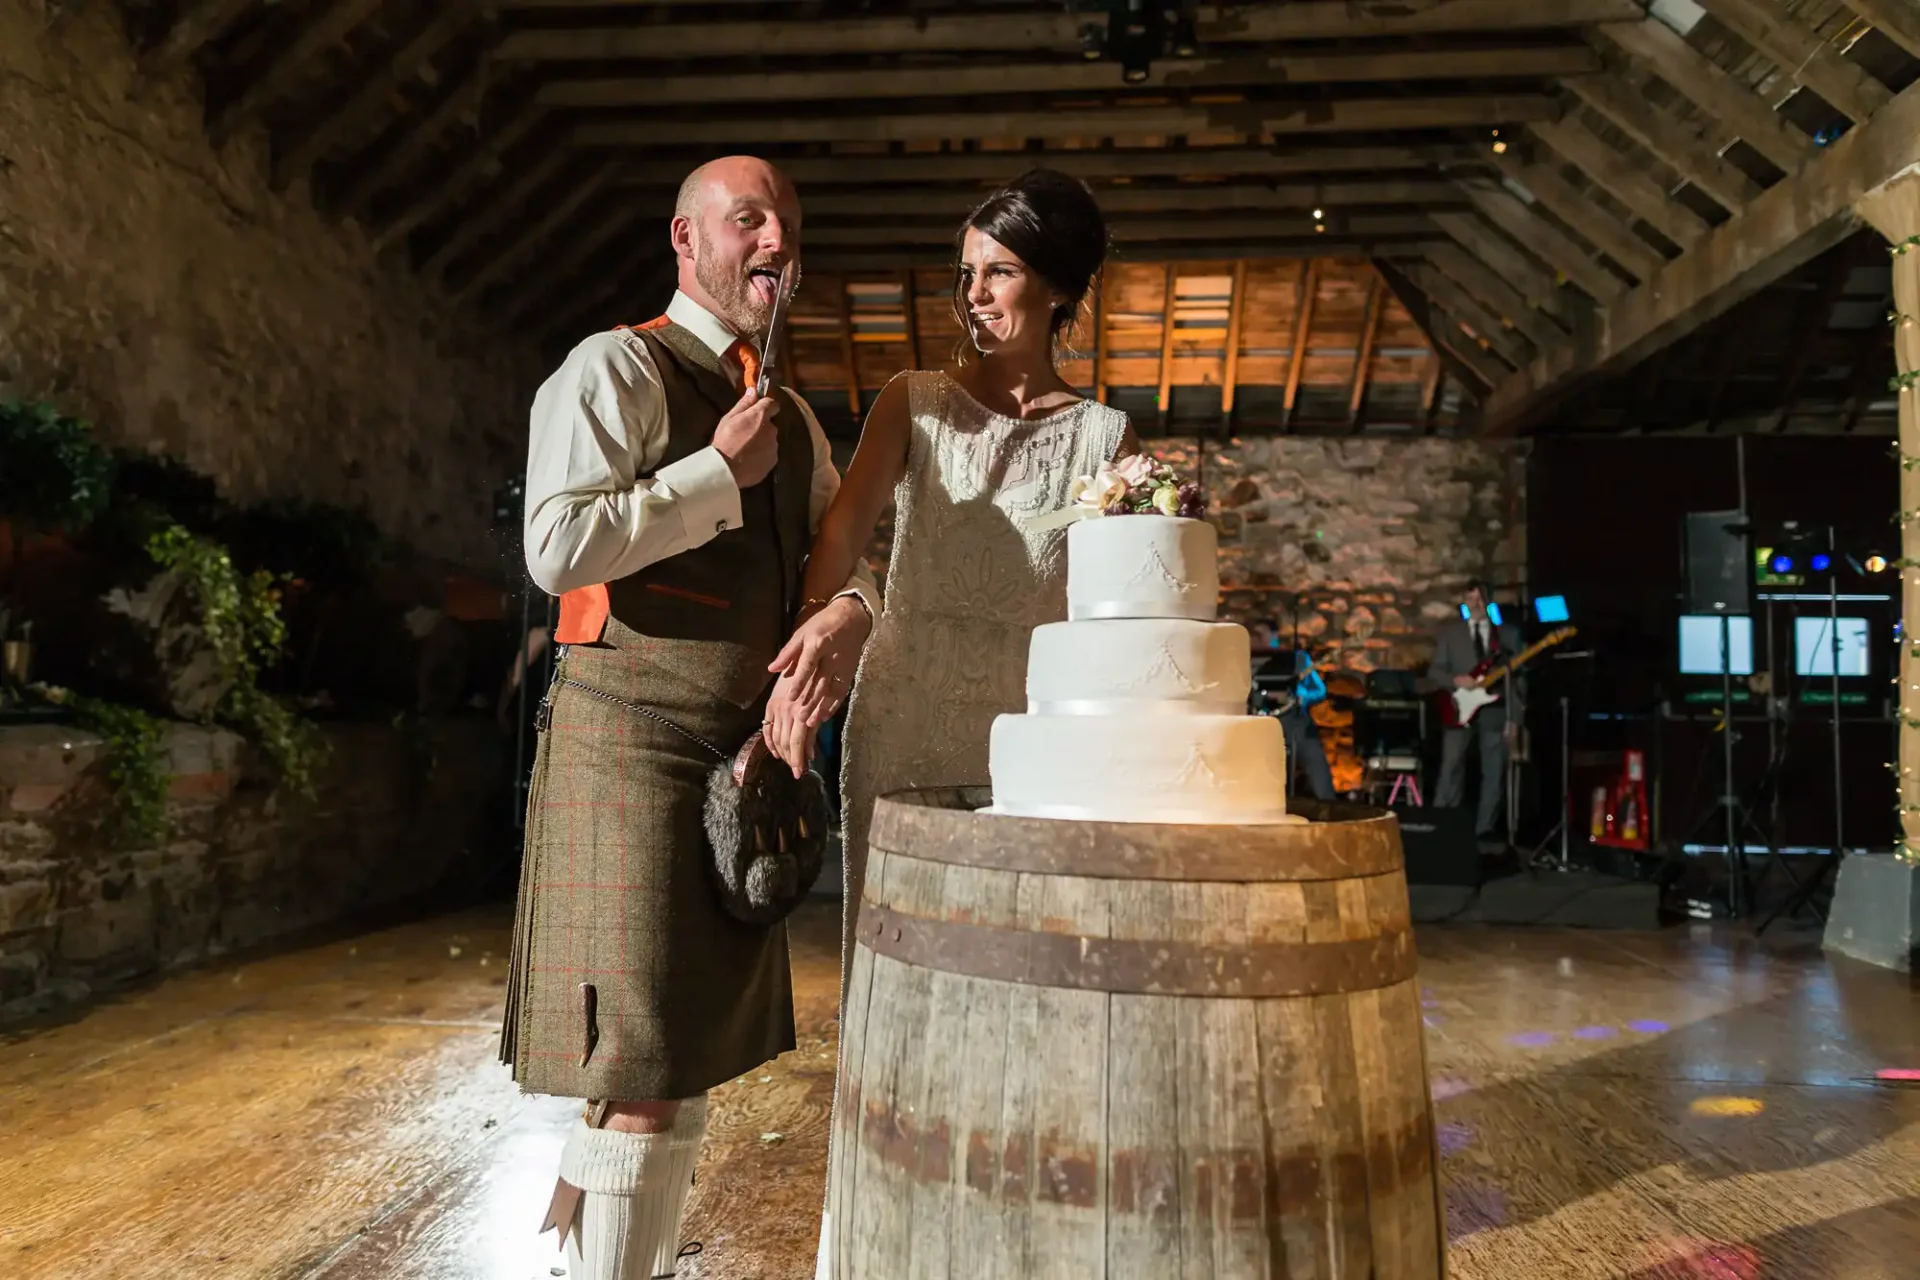 A bride and groom in a rustic venue with the groom in a kilt, laughing while holding a knife over a wedding cake on a barrel.